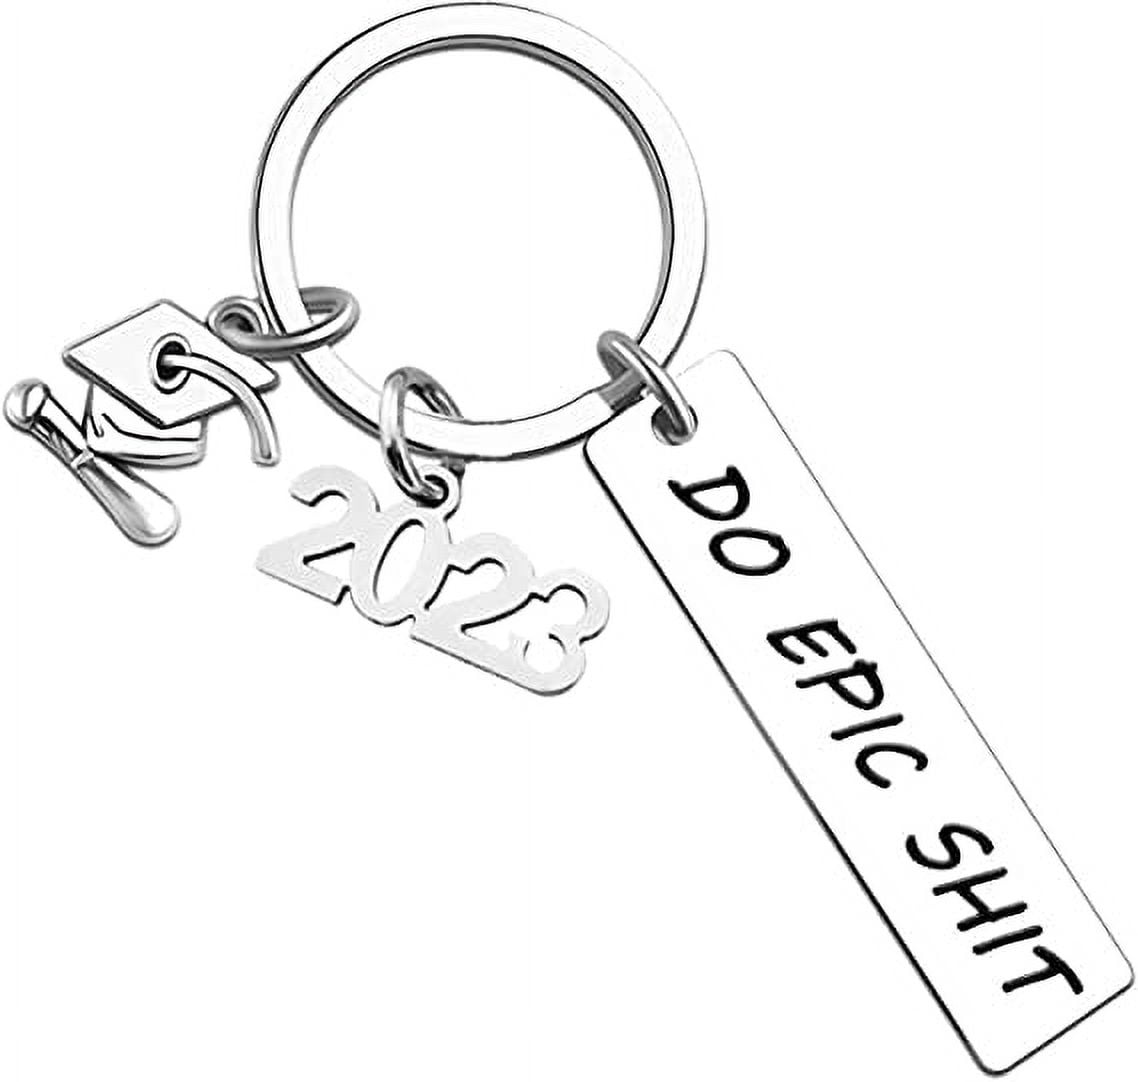 Stylish Leather Keychain: The Perfect Graduation Gift for Him or Her with a  Fun Reminder – Maploi